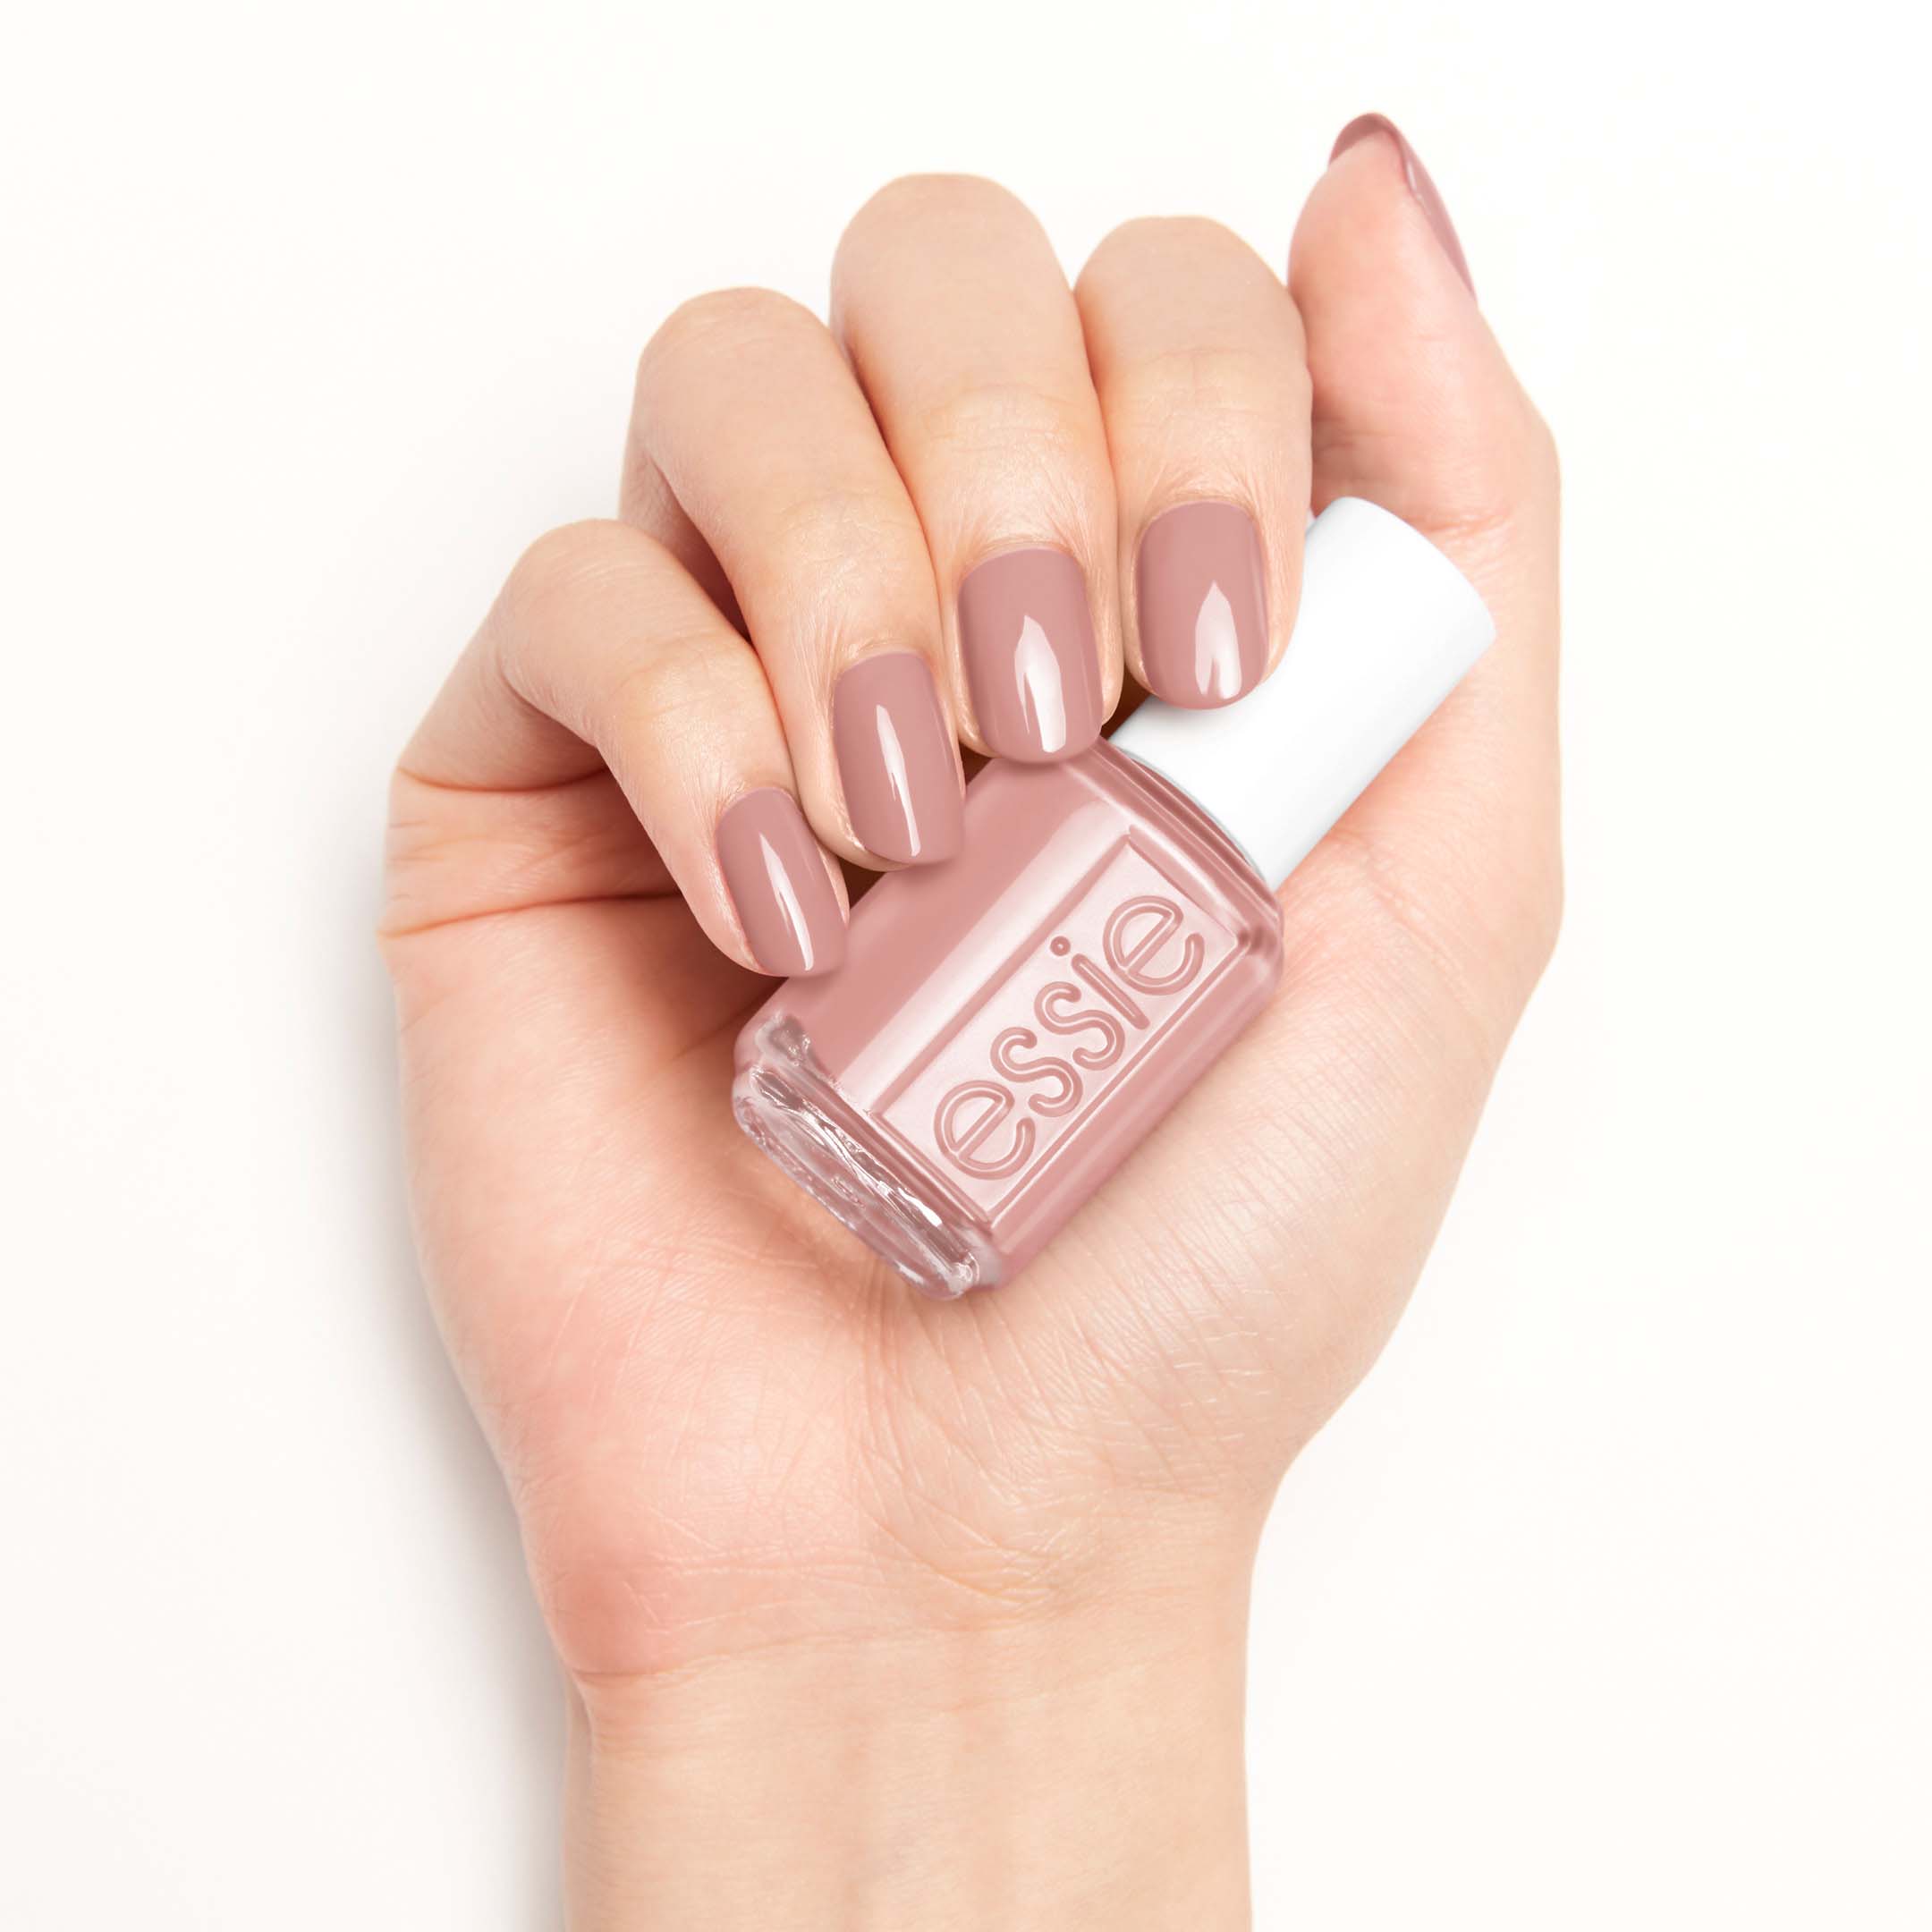 Essie not red-y for bed collection Nail Lacquer 749 The Snuggle Is Real | Nagellacke